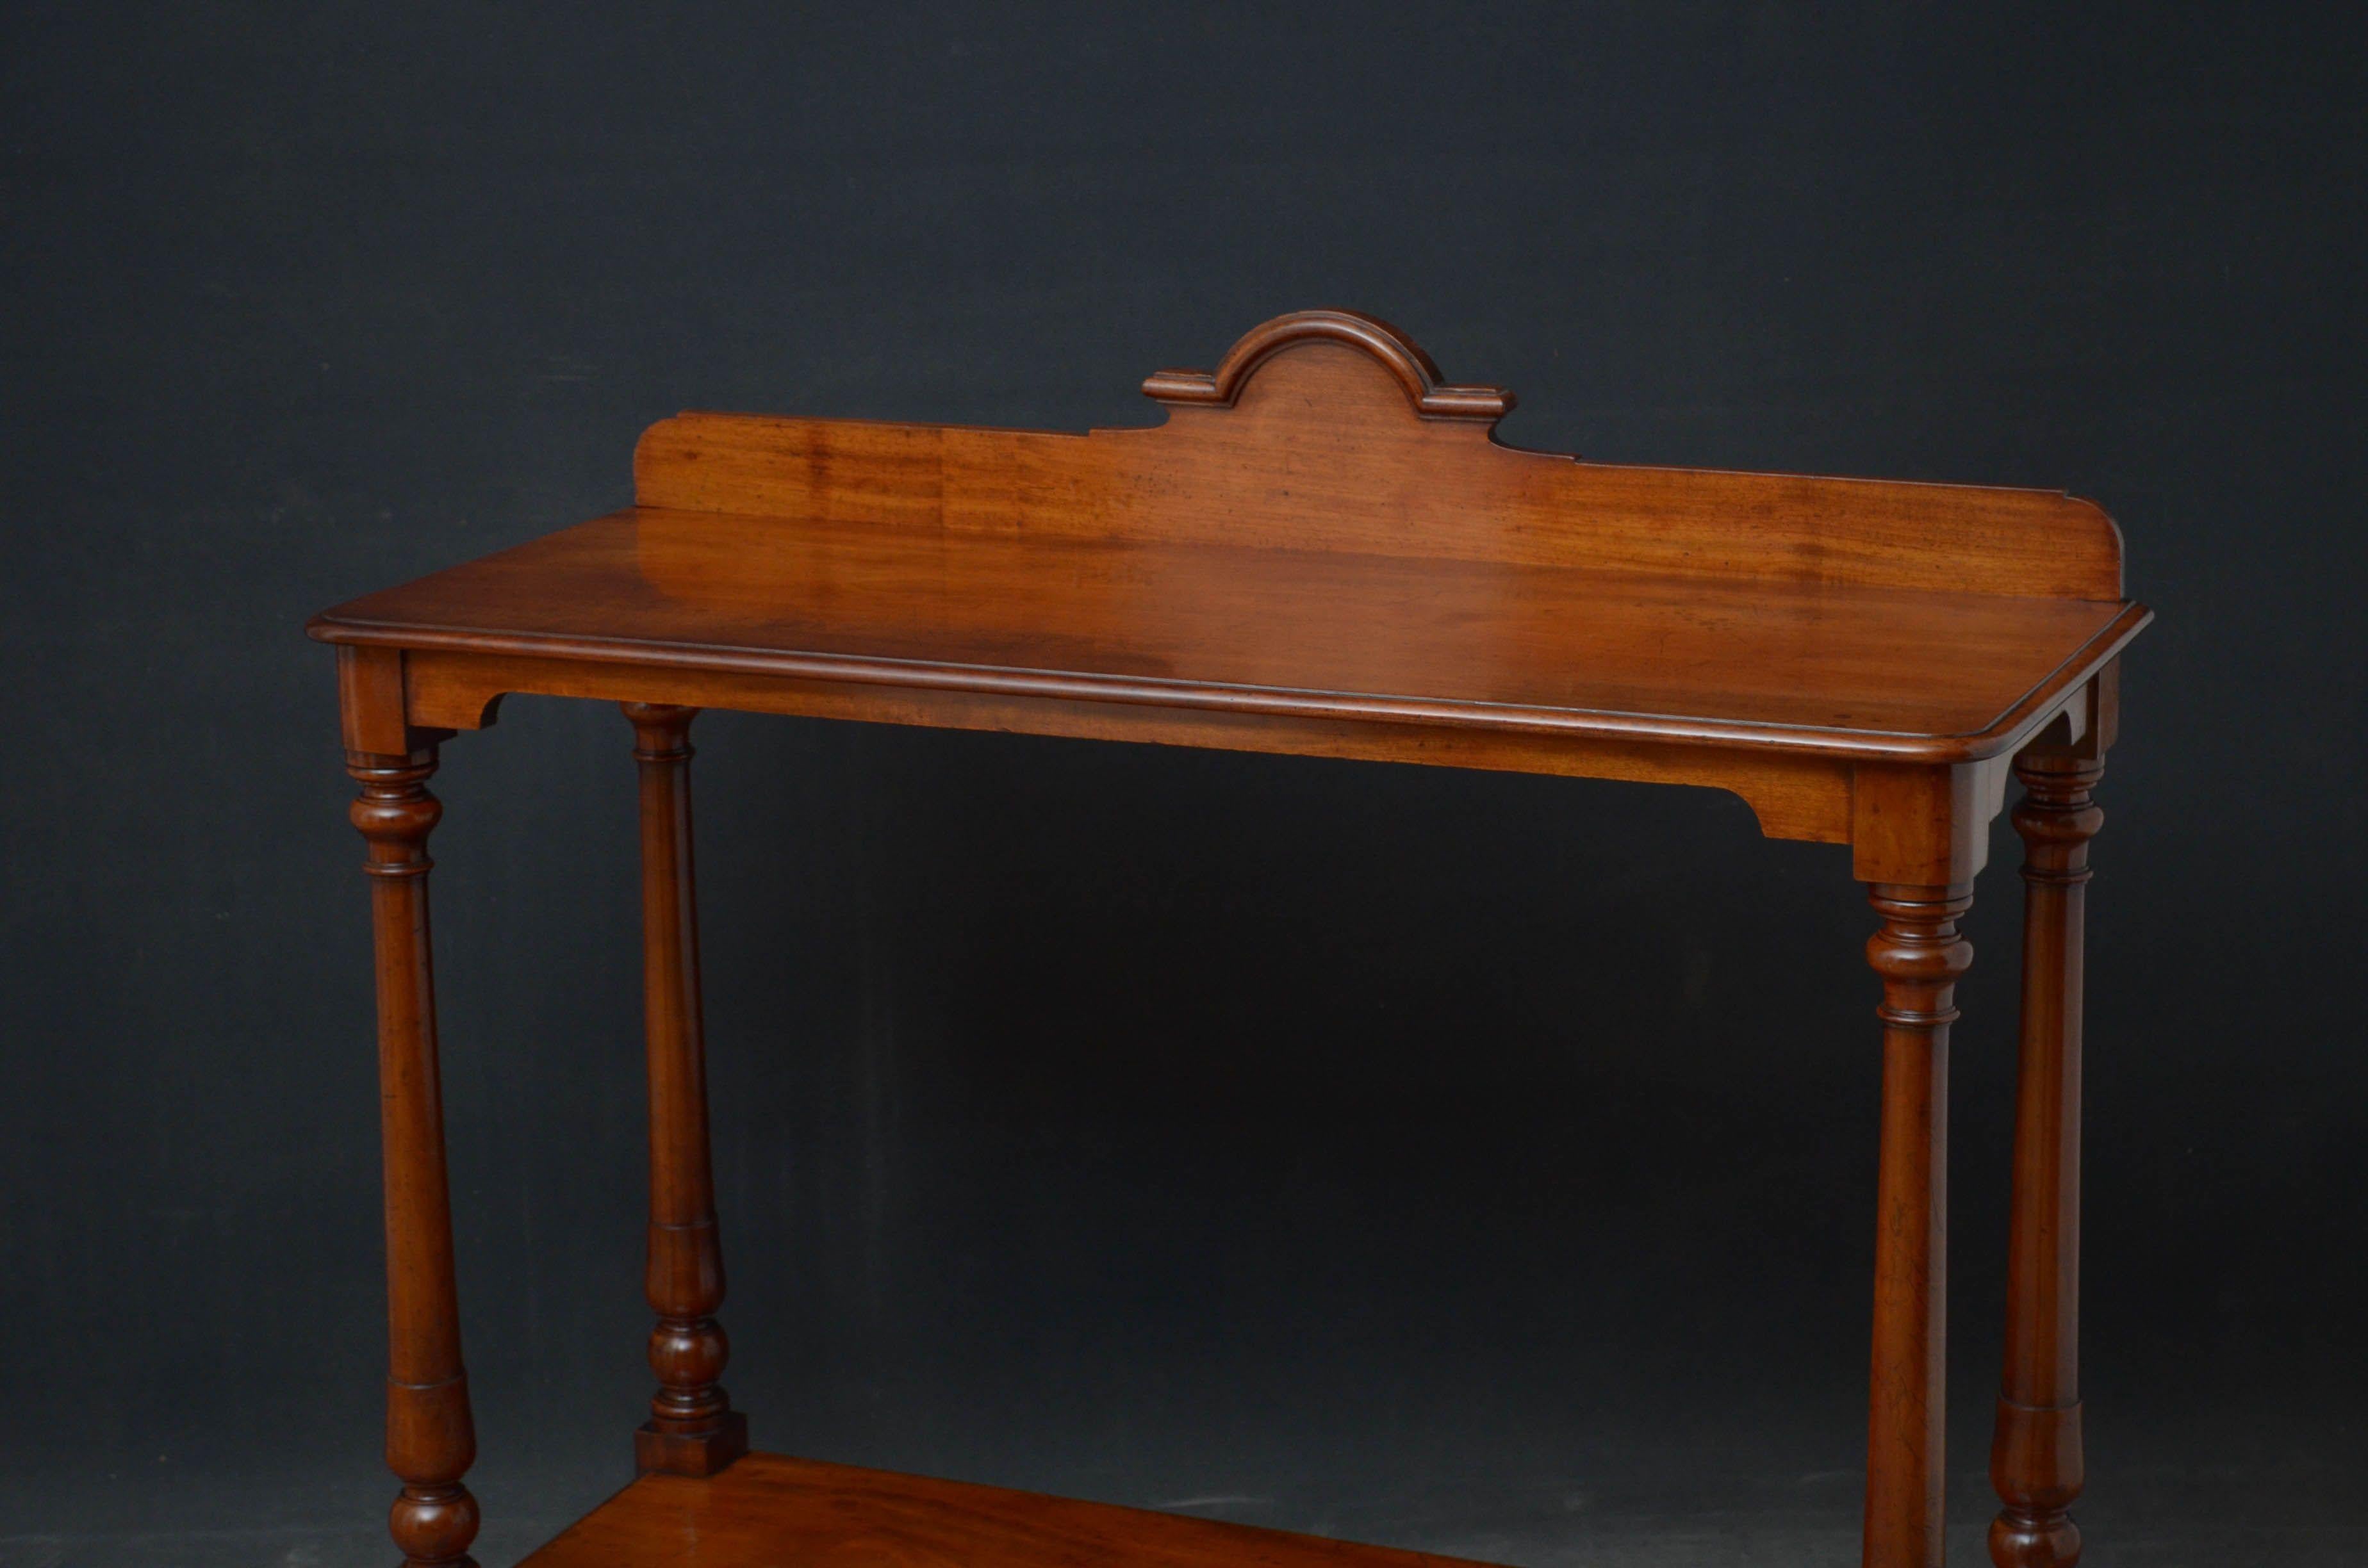 Sn5227 Early Victorian console table in mahogany, having shaped upstand to the back edge and figured top, raised on four turned legs united by undertier, all standing on bun feet. This antique hall stand / etagere retains its original finish which